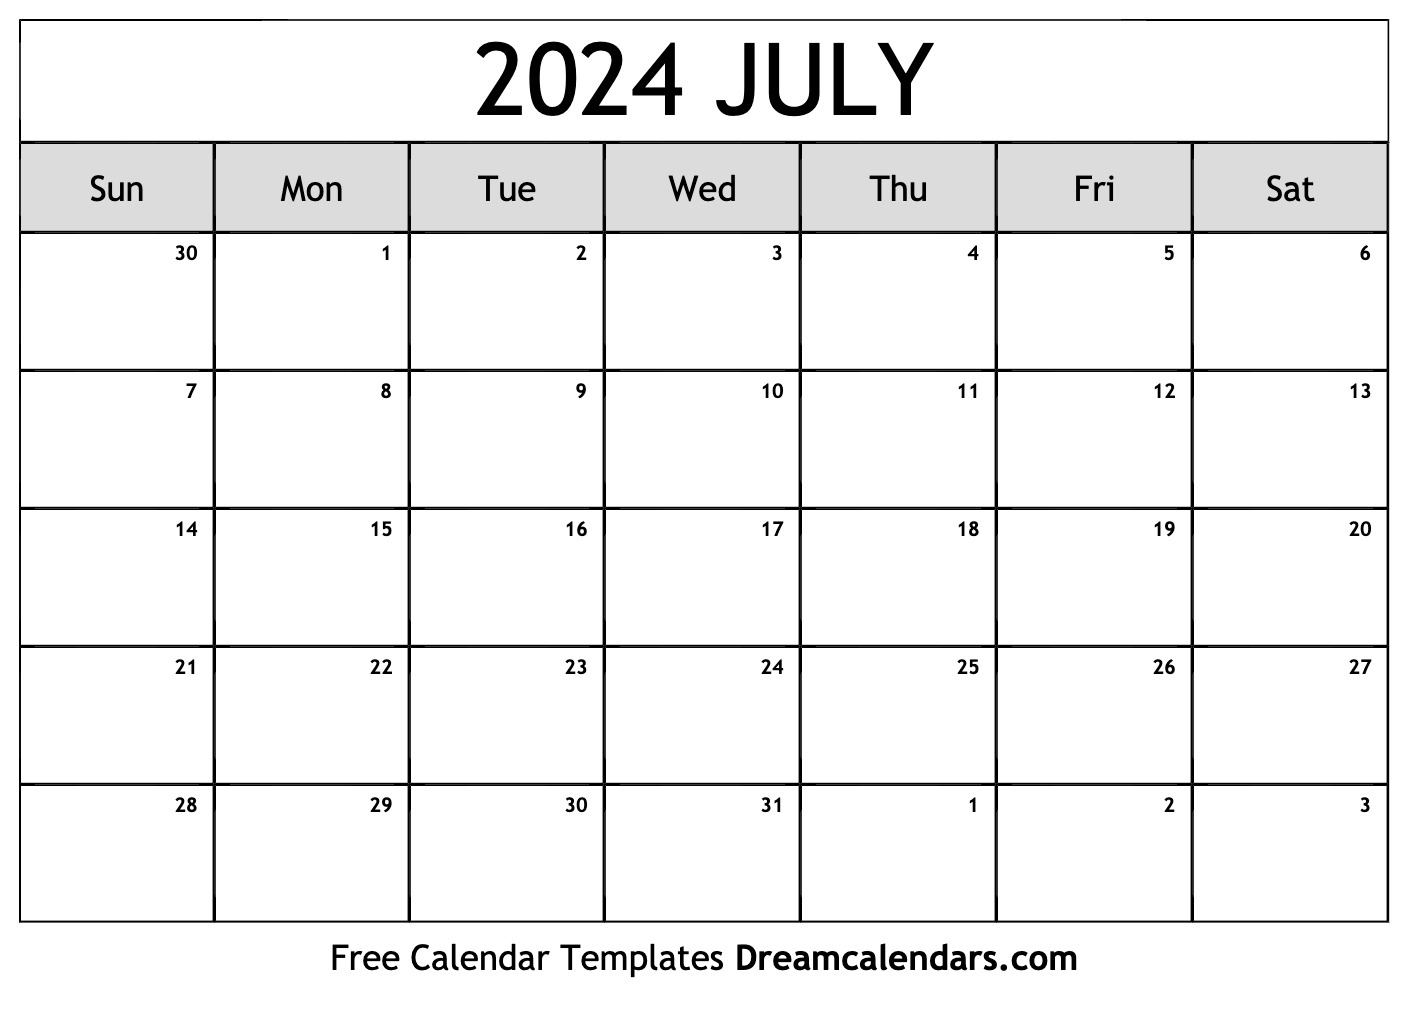 July 2024 Calendar | Free Blank Printable With Holidays in Free Printable Blank Calendar July 2024